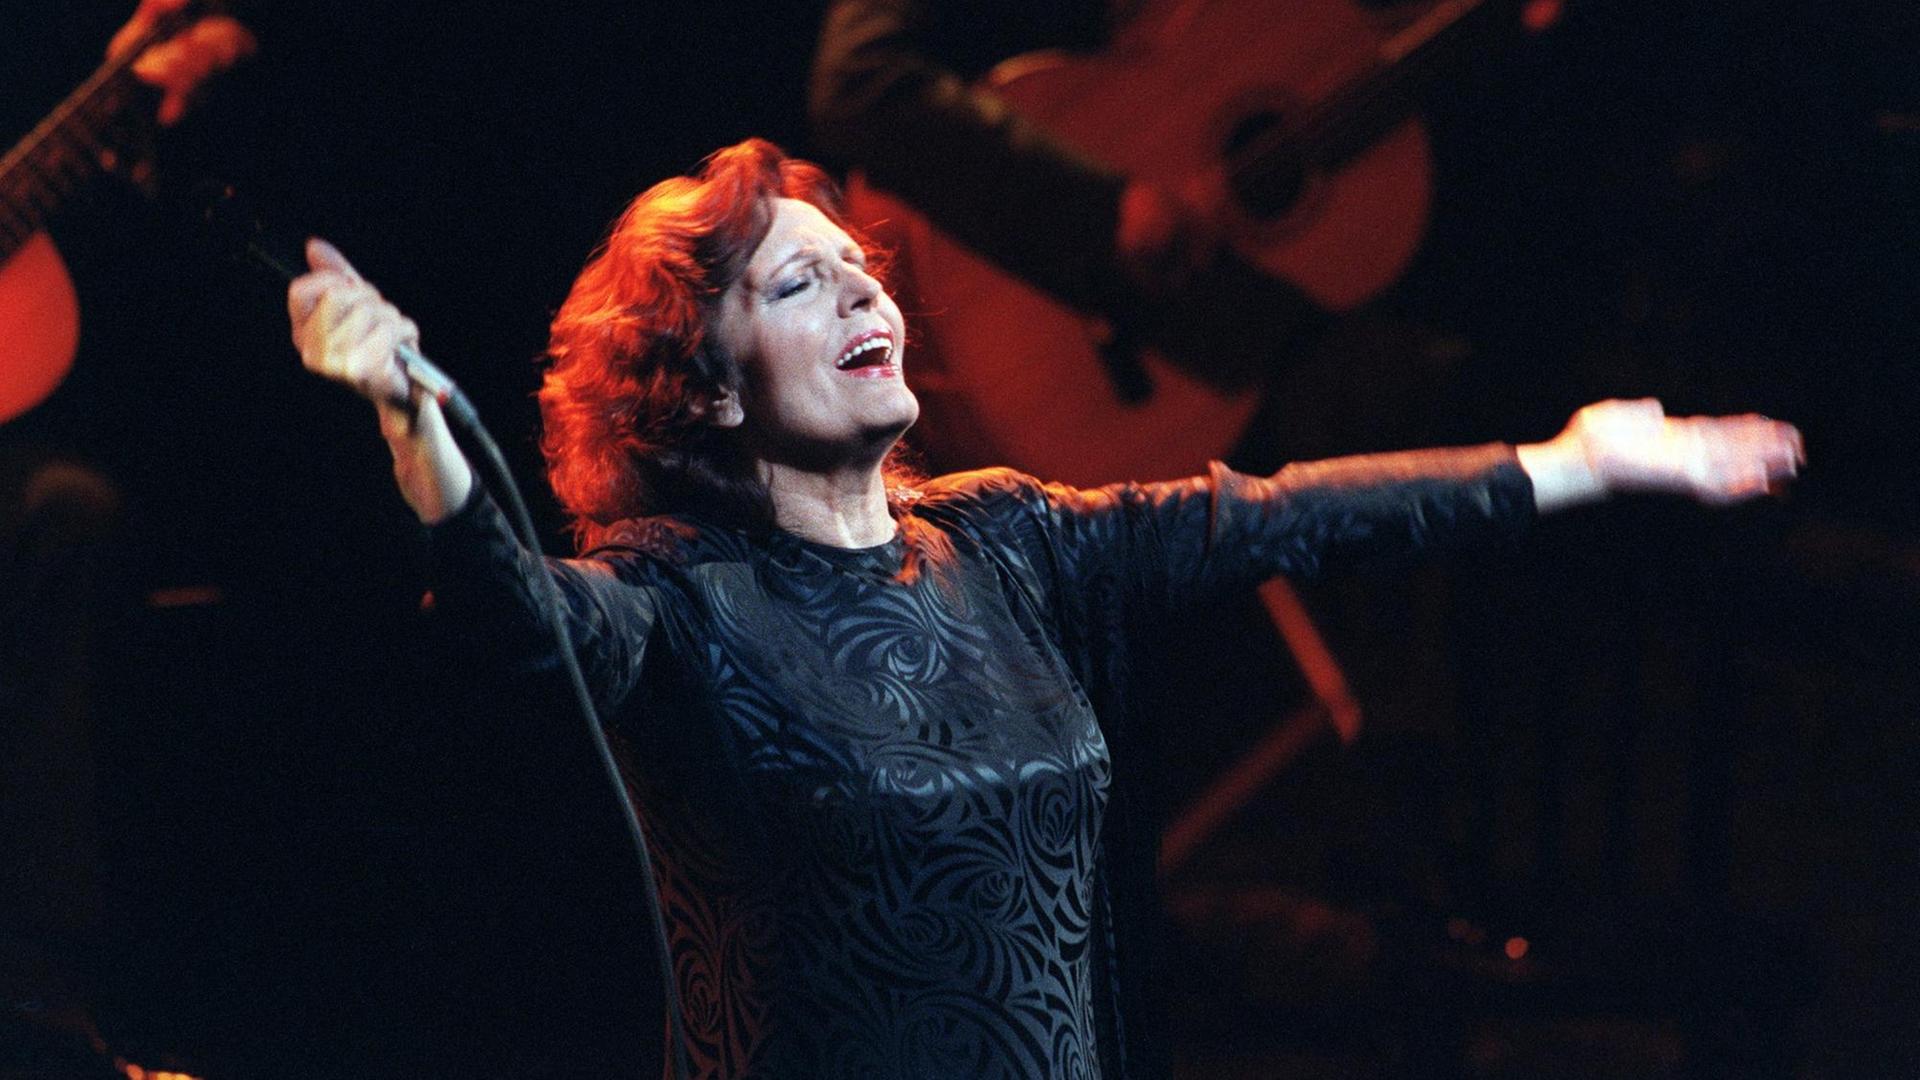 Portuguese singer Amalia Rodrigues performs on the Olympia concert hall stage, on April 21, 1987 in Paris. Rodrigues' speciality was fado, traditional Portuguese singing that emphasizes the themes of nostalgia sadness, love and death. Amalia Rodrigues died 06 October 1999 in Lisbon at the age of 79. (Photo by JACQUES DEMARTHON / AFP)